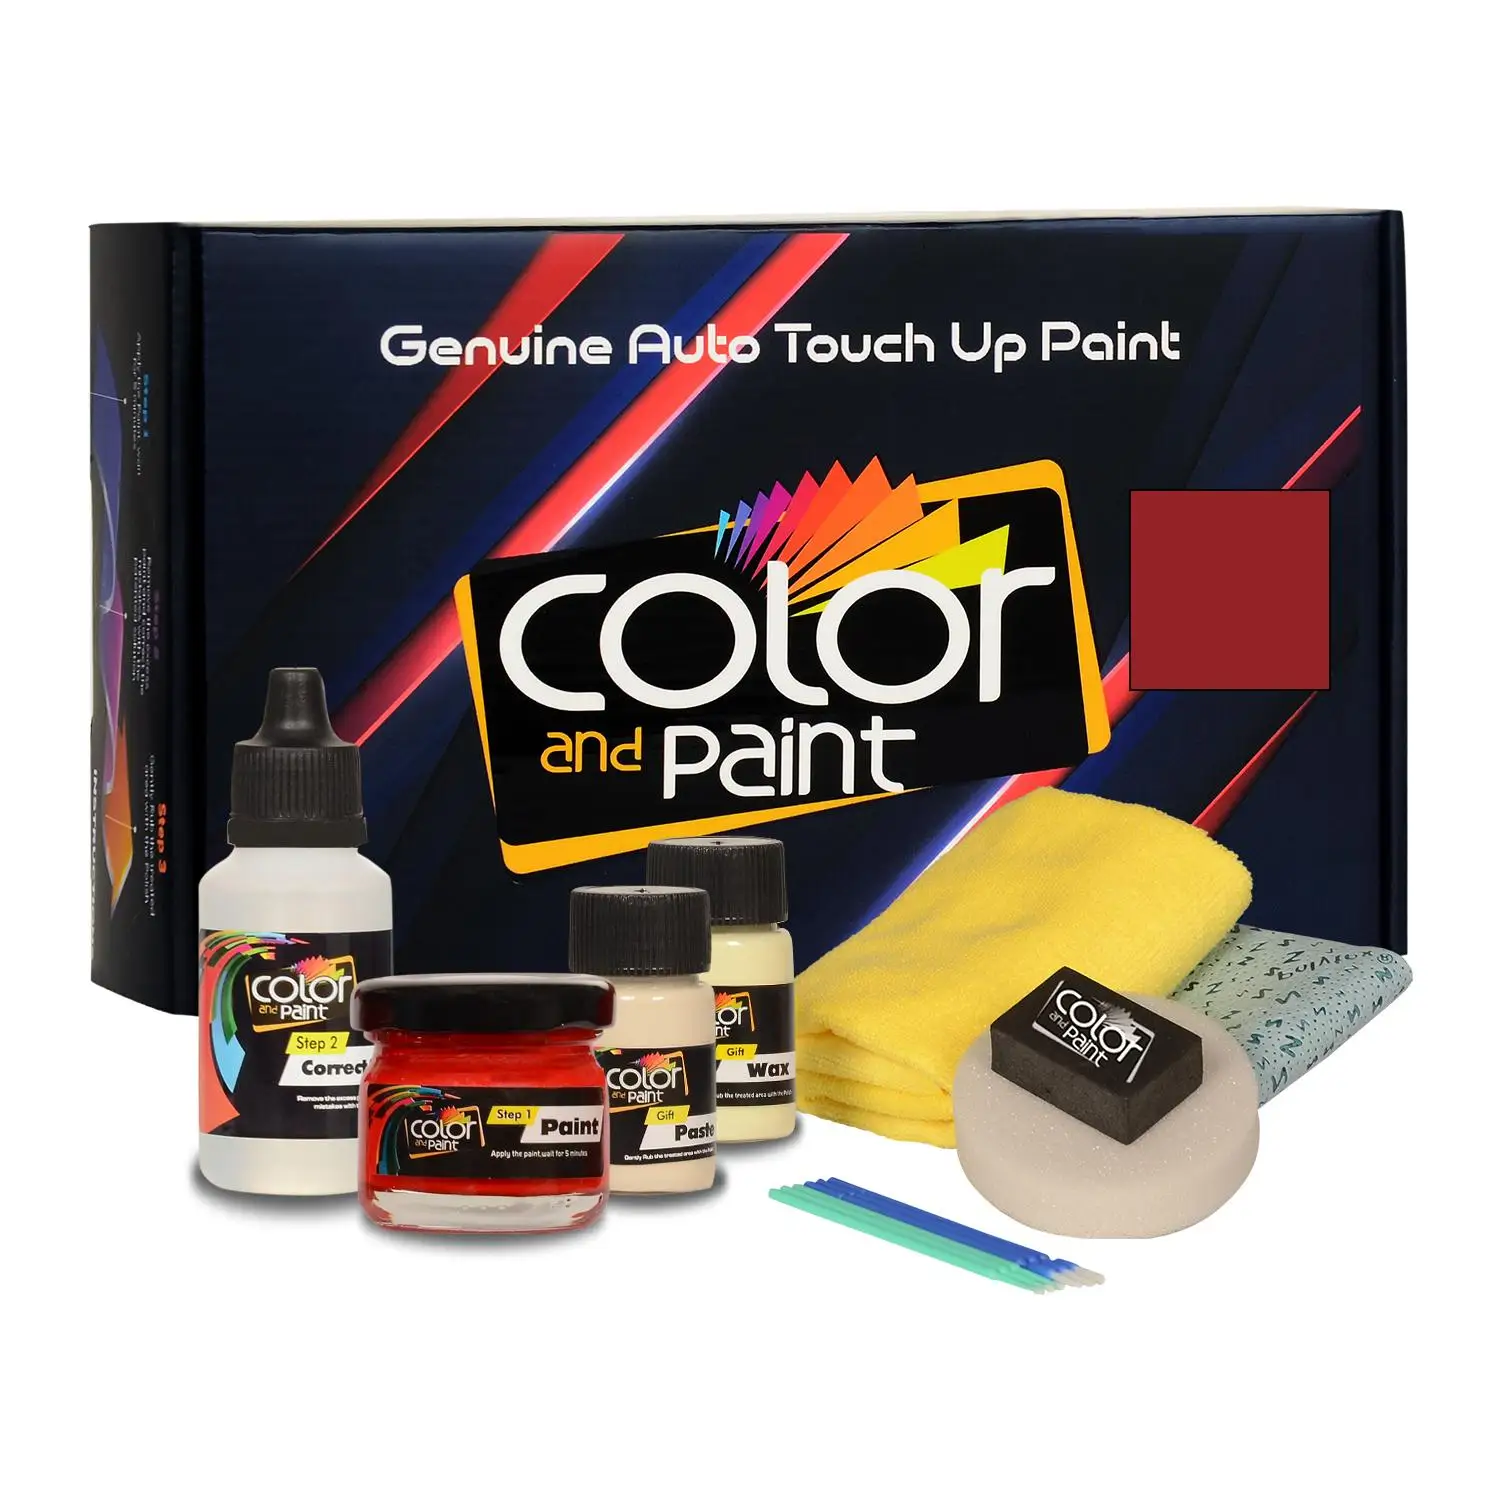 

Color and Paint compatible with Subaru Automotive Touch Up Paint - SEDONA RED PEARL - 94H - Basic Care